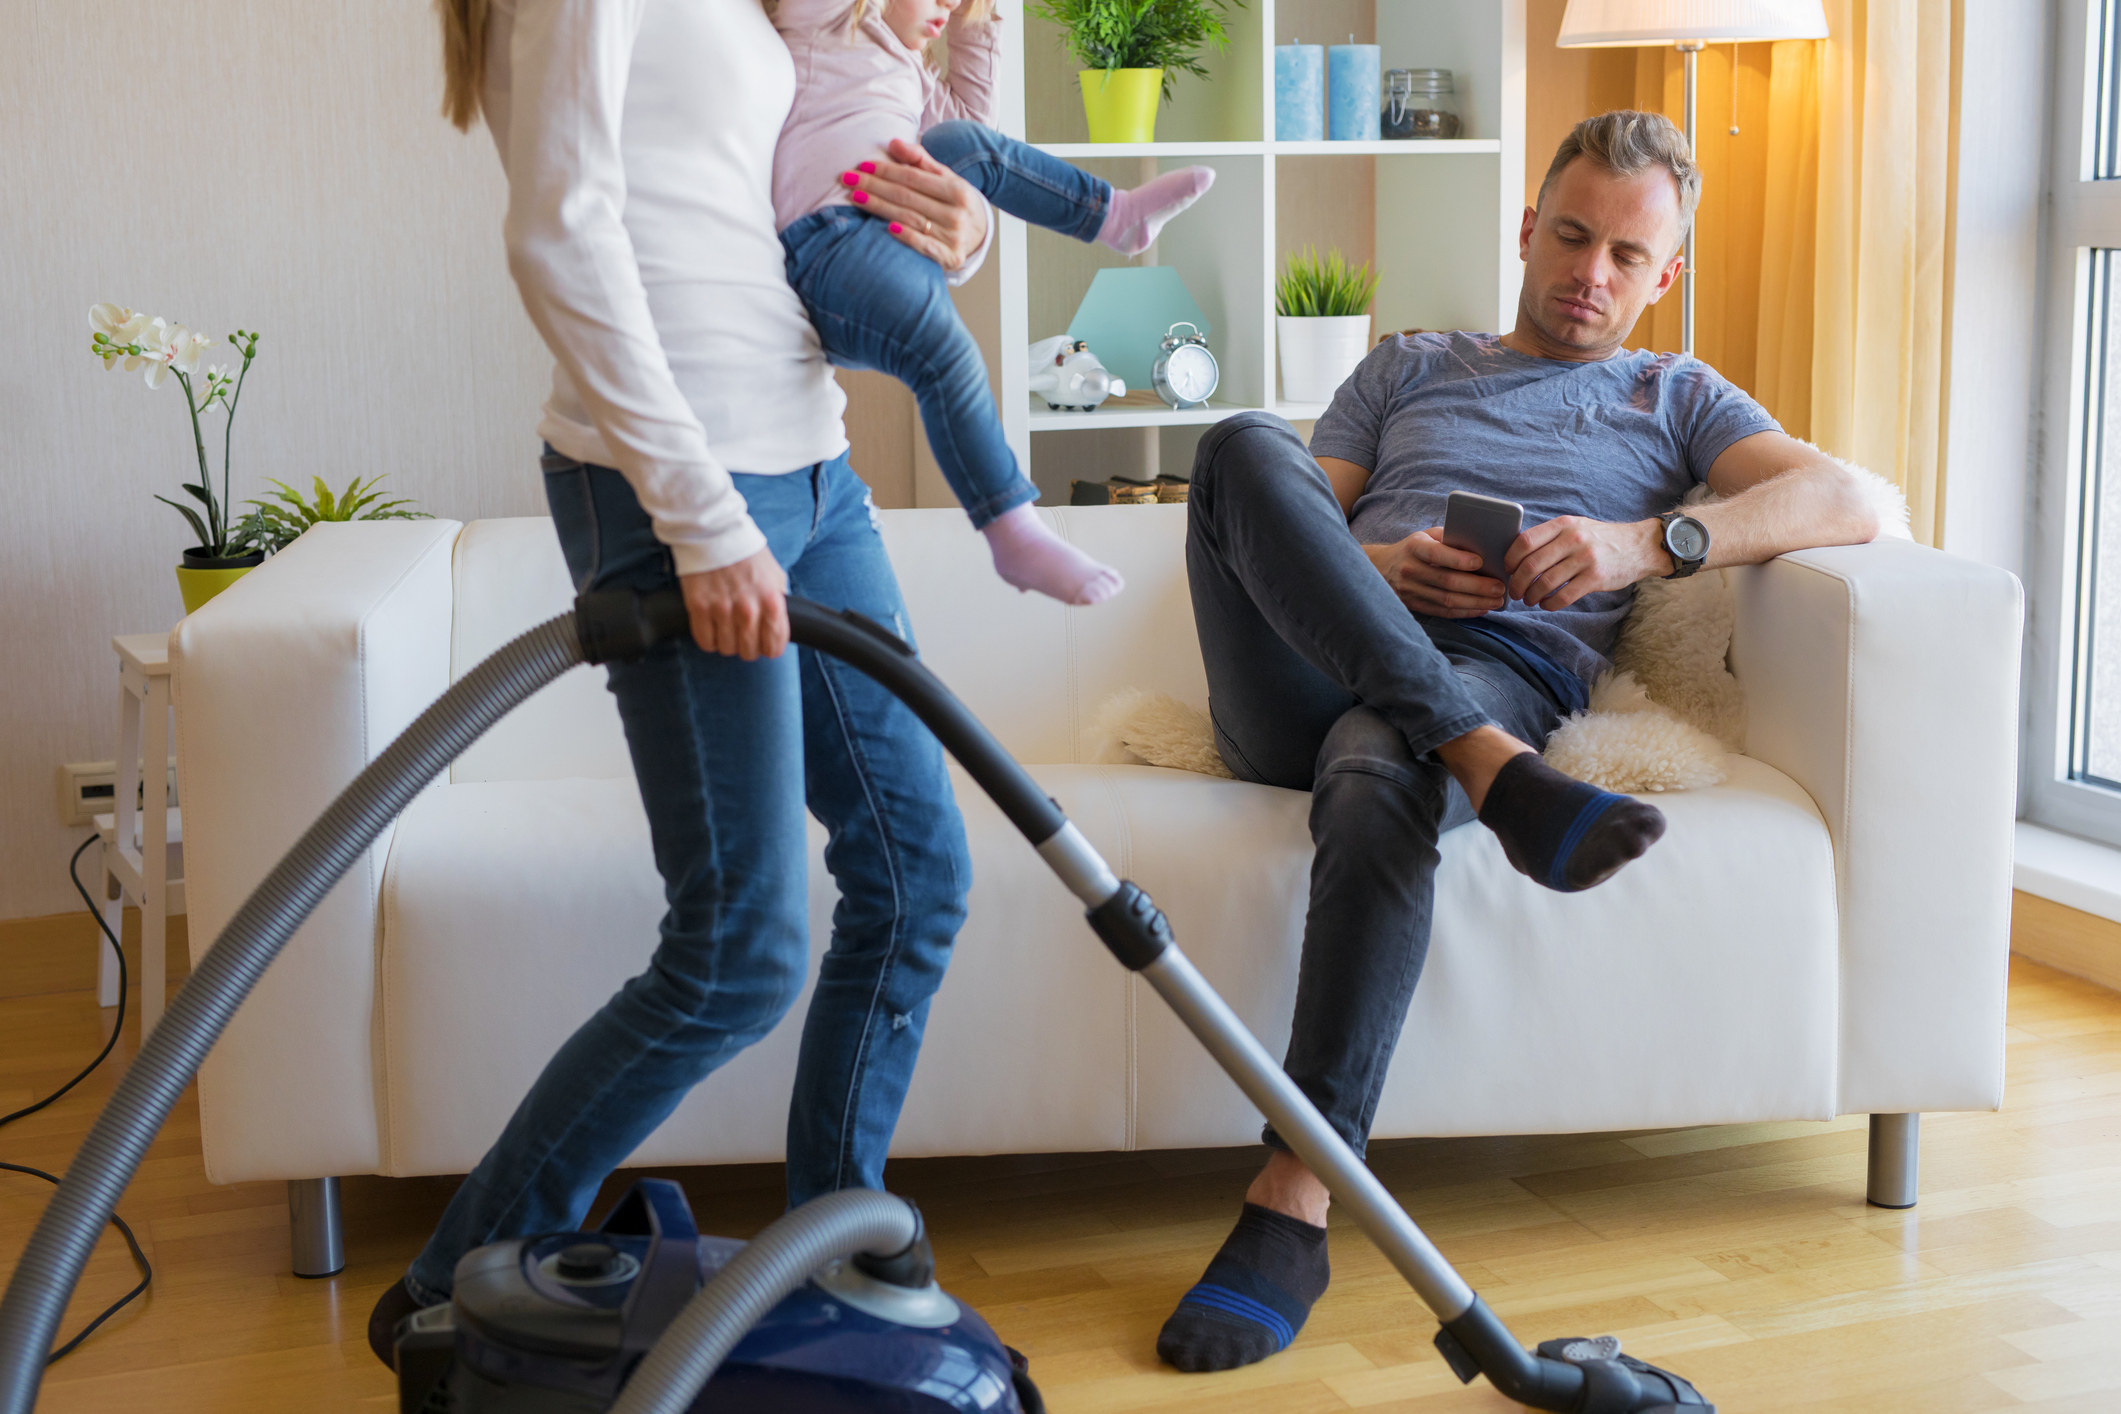 Woman holding child while vacuuming, and her husband sitting on couch on his phone